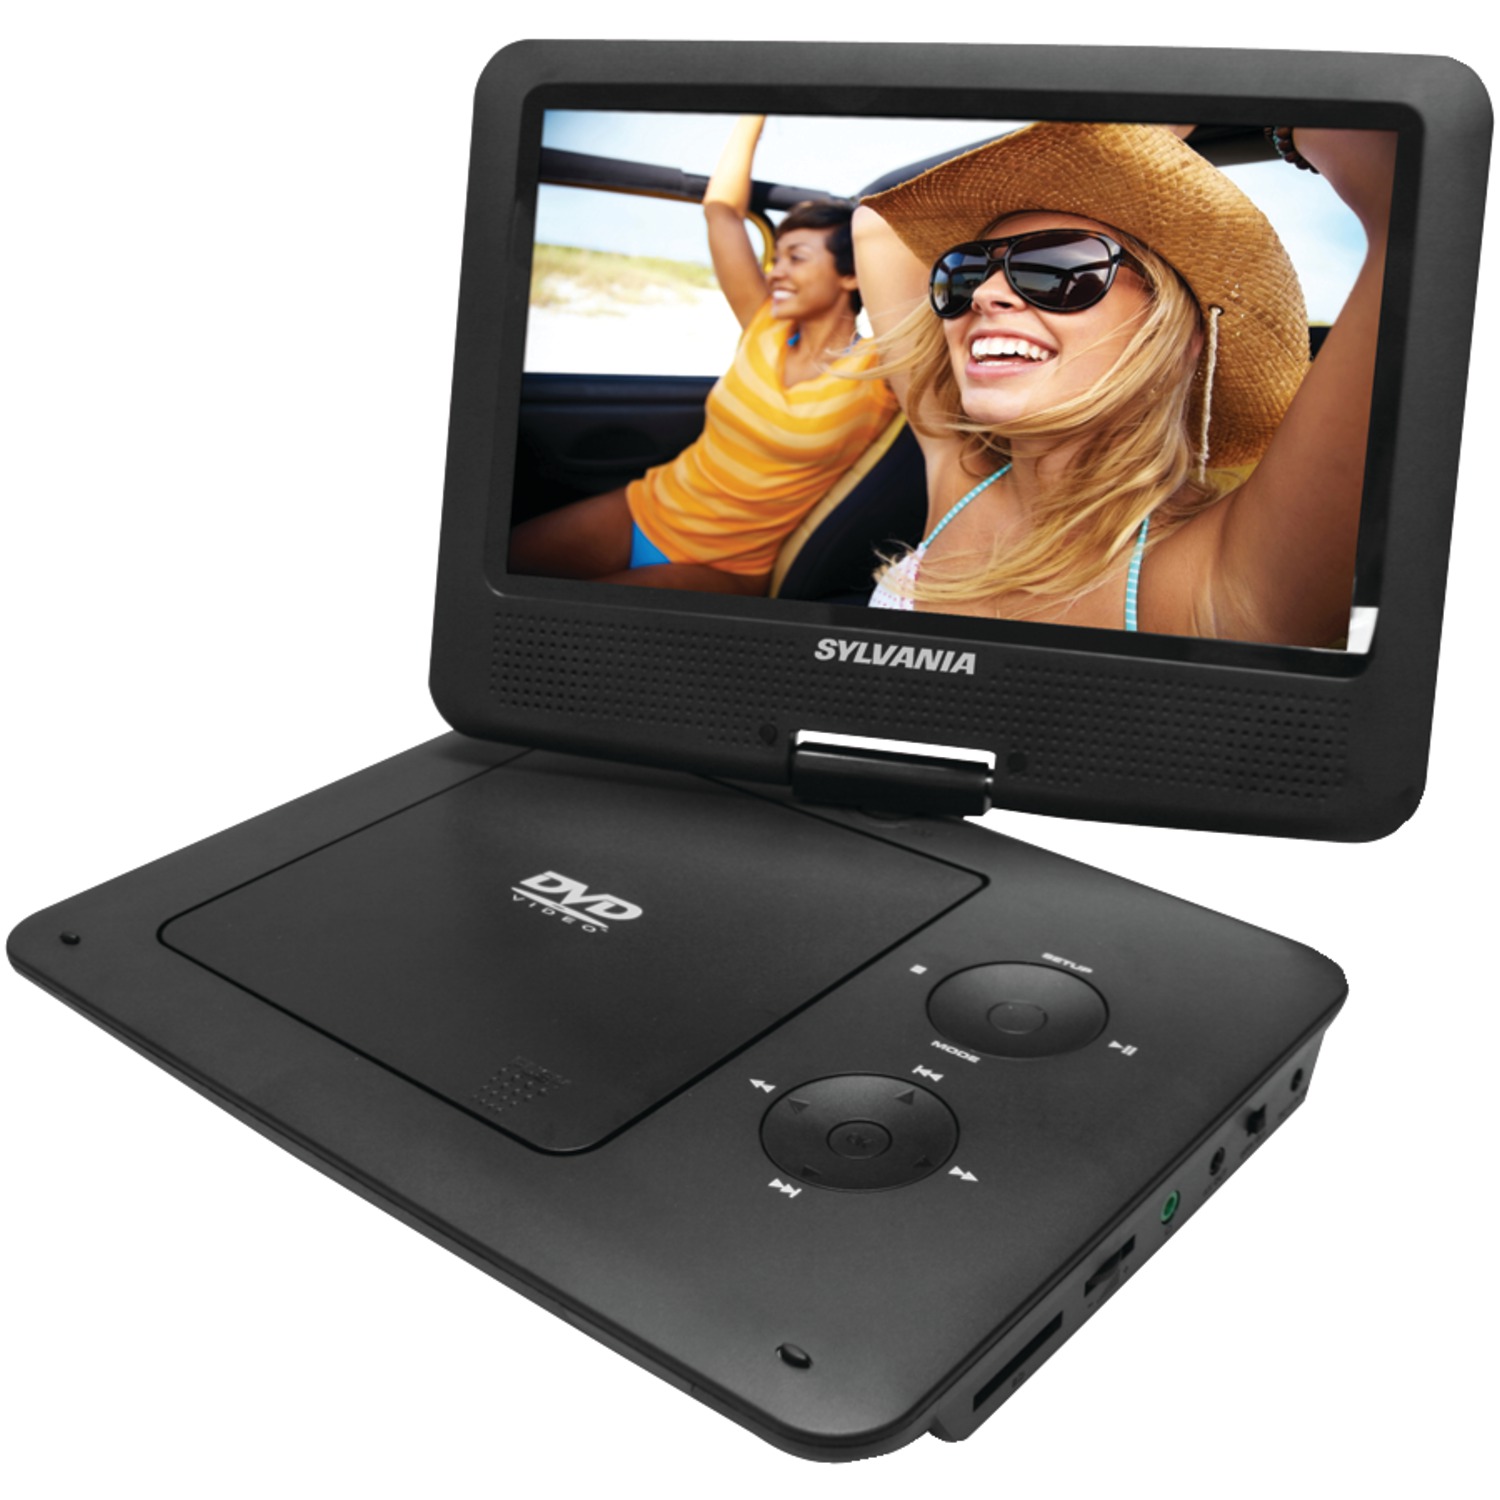 Sylvania 9" Portable Dvd Player With Swivel Screen & 5-hour Battery - SDVD9020 black - image 1 of 2